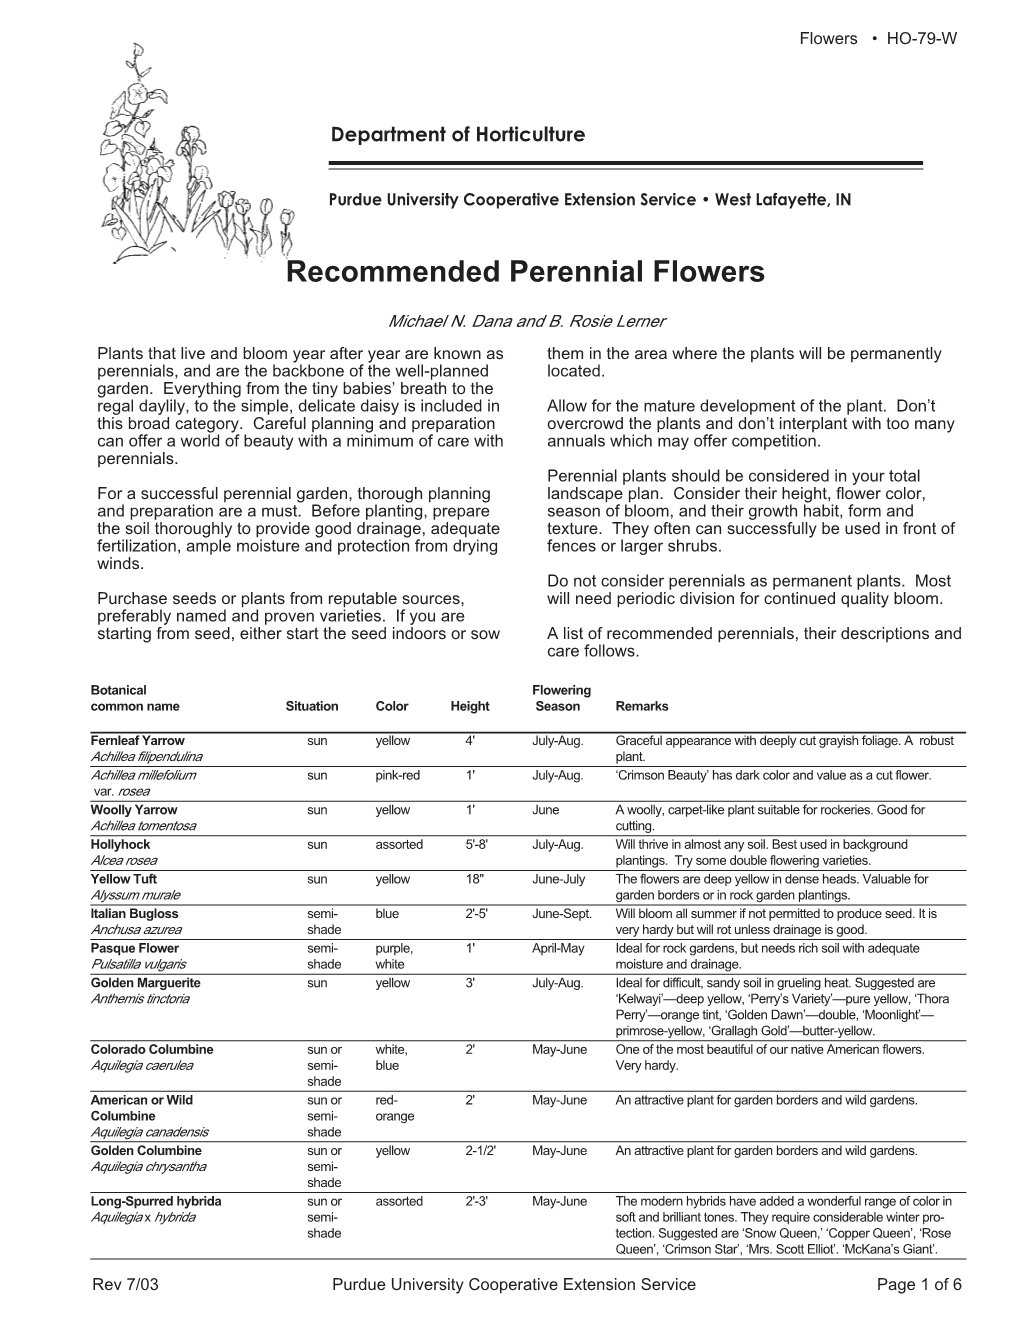 Recommended Perennial Flowers